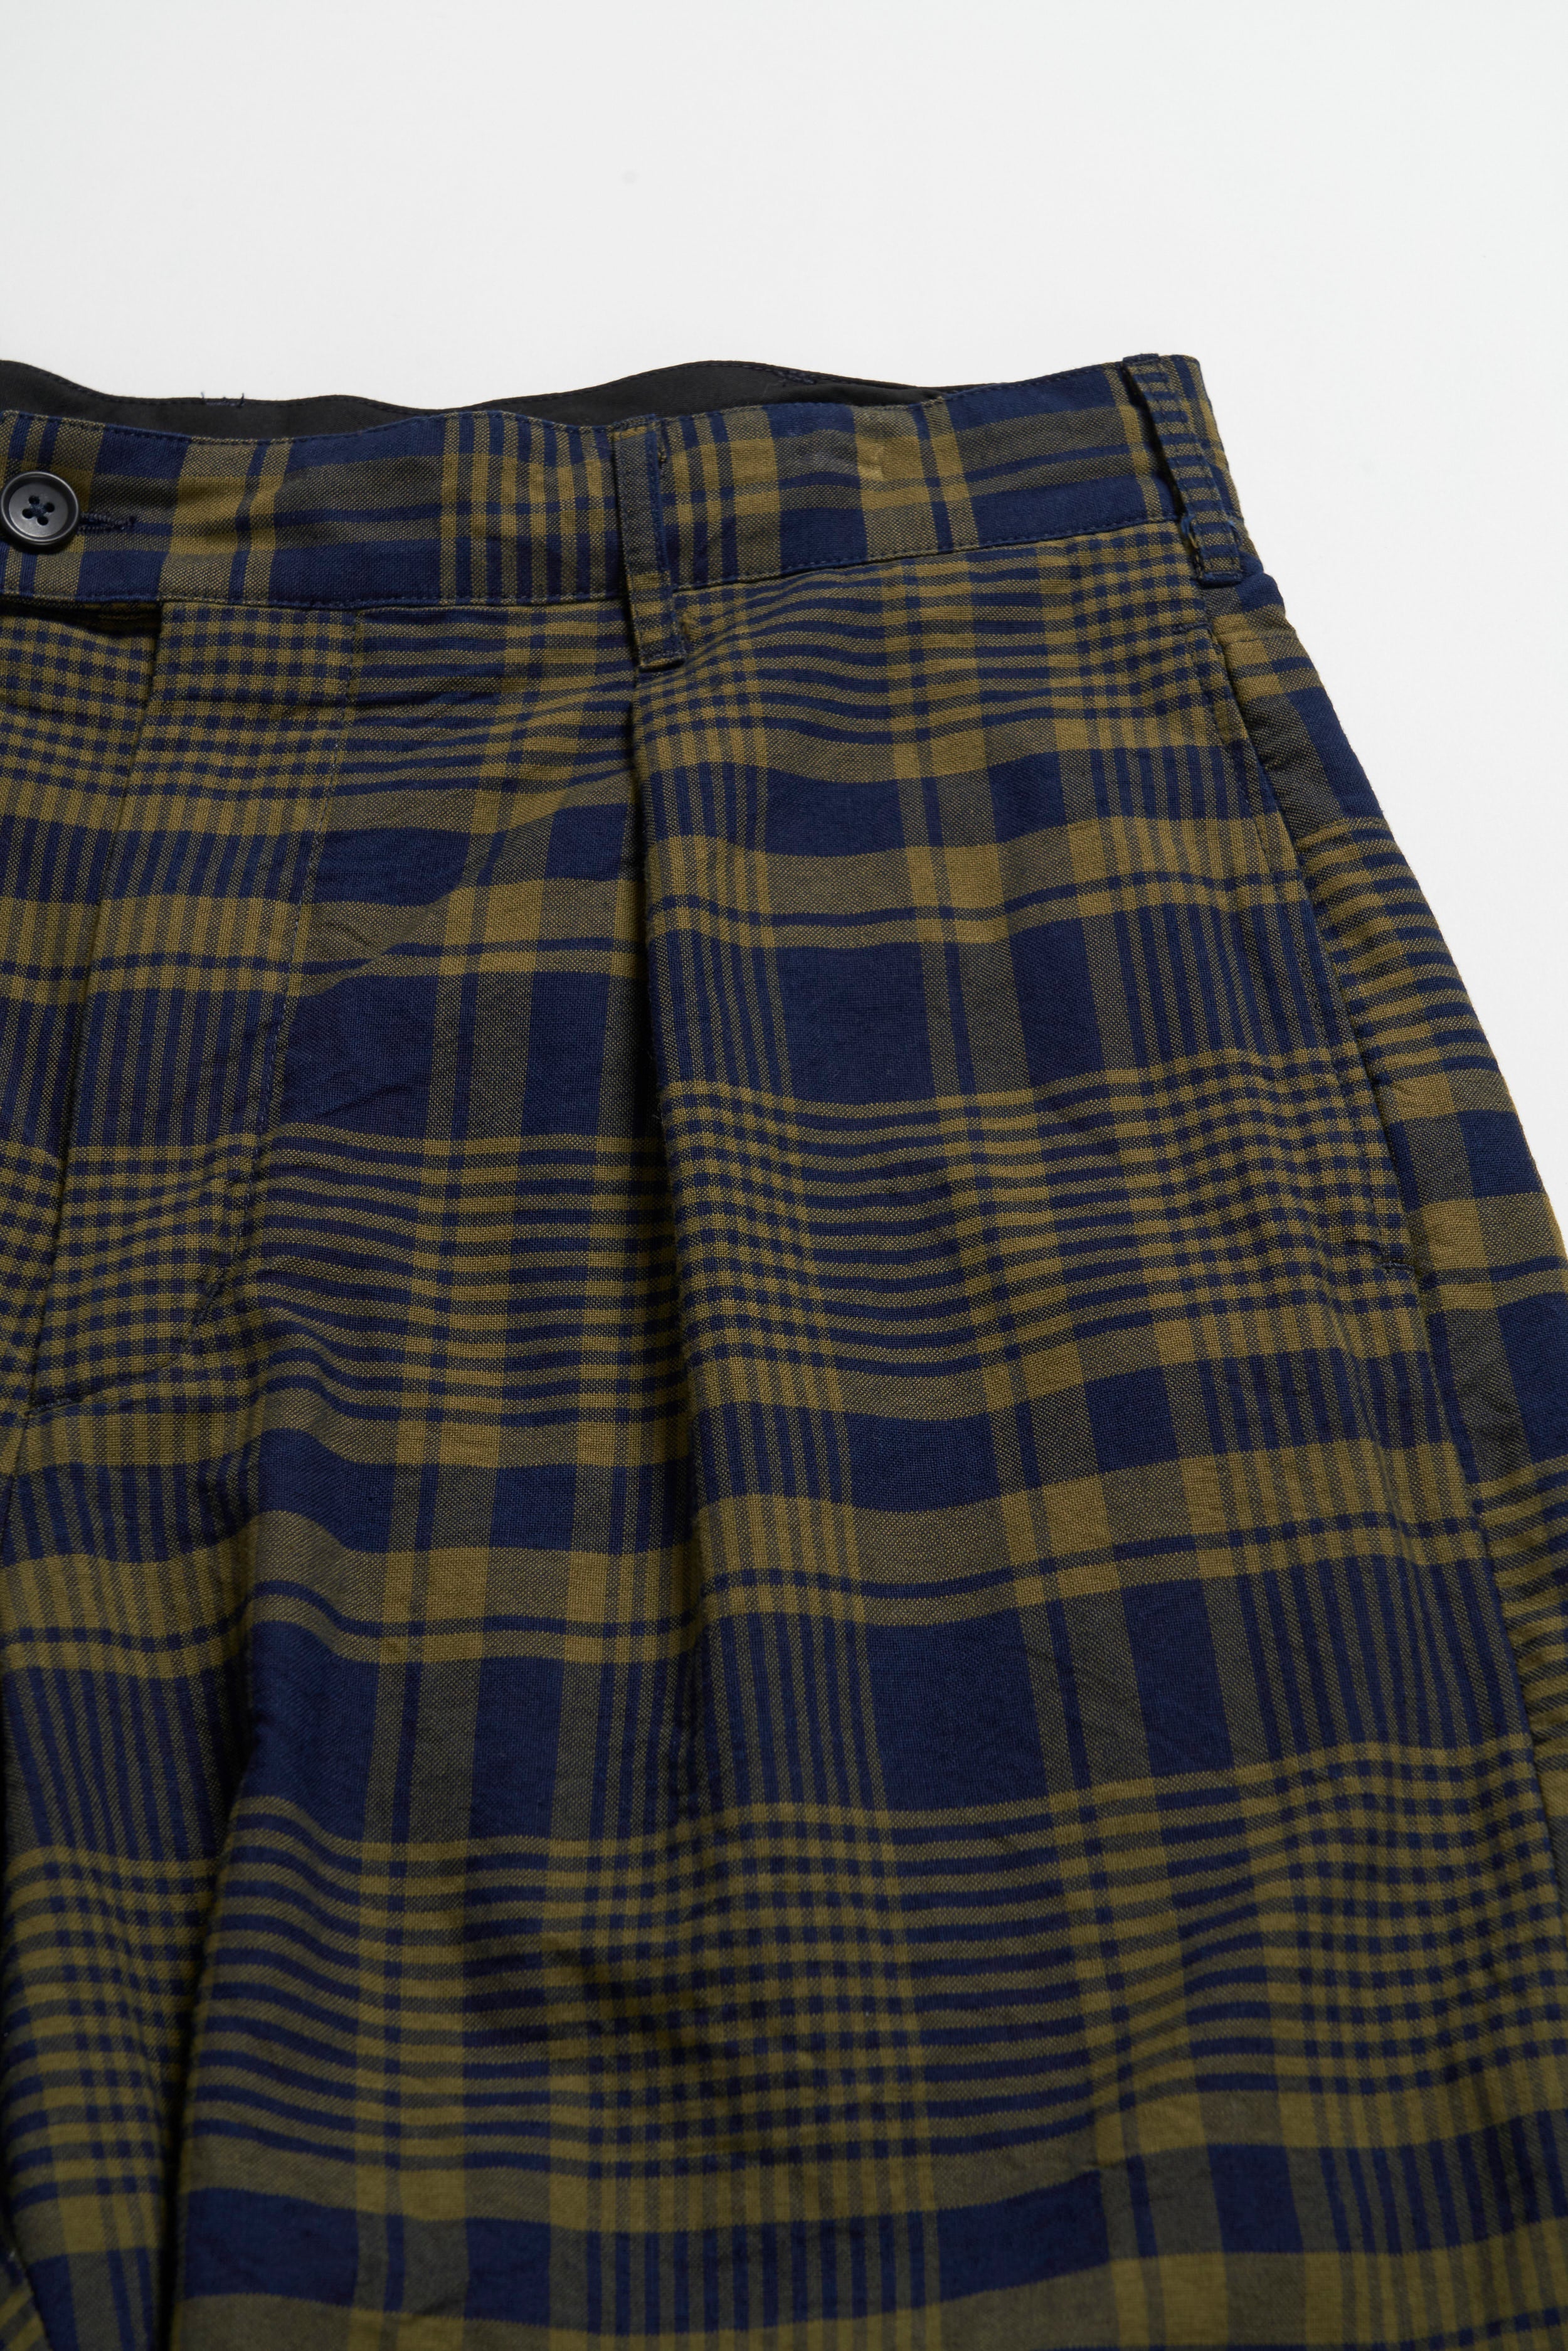 Engineered Garments Carlyle Pant - Navy/Olive Cotton Plaid